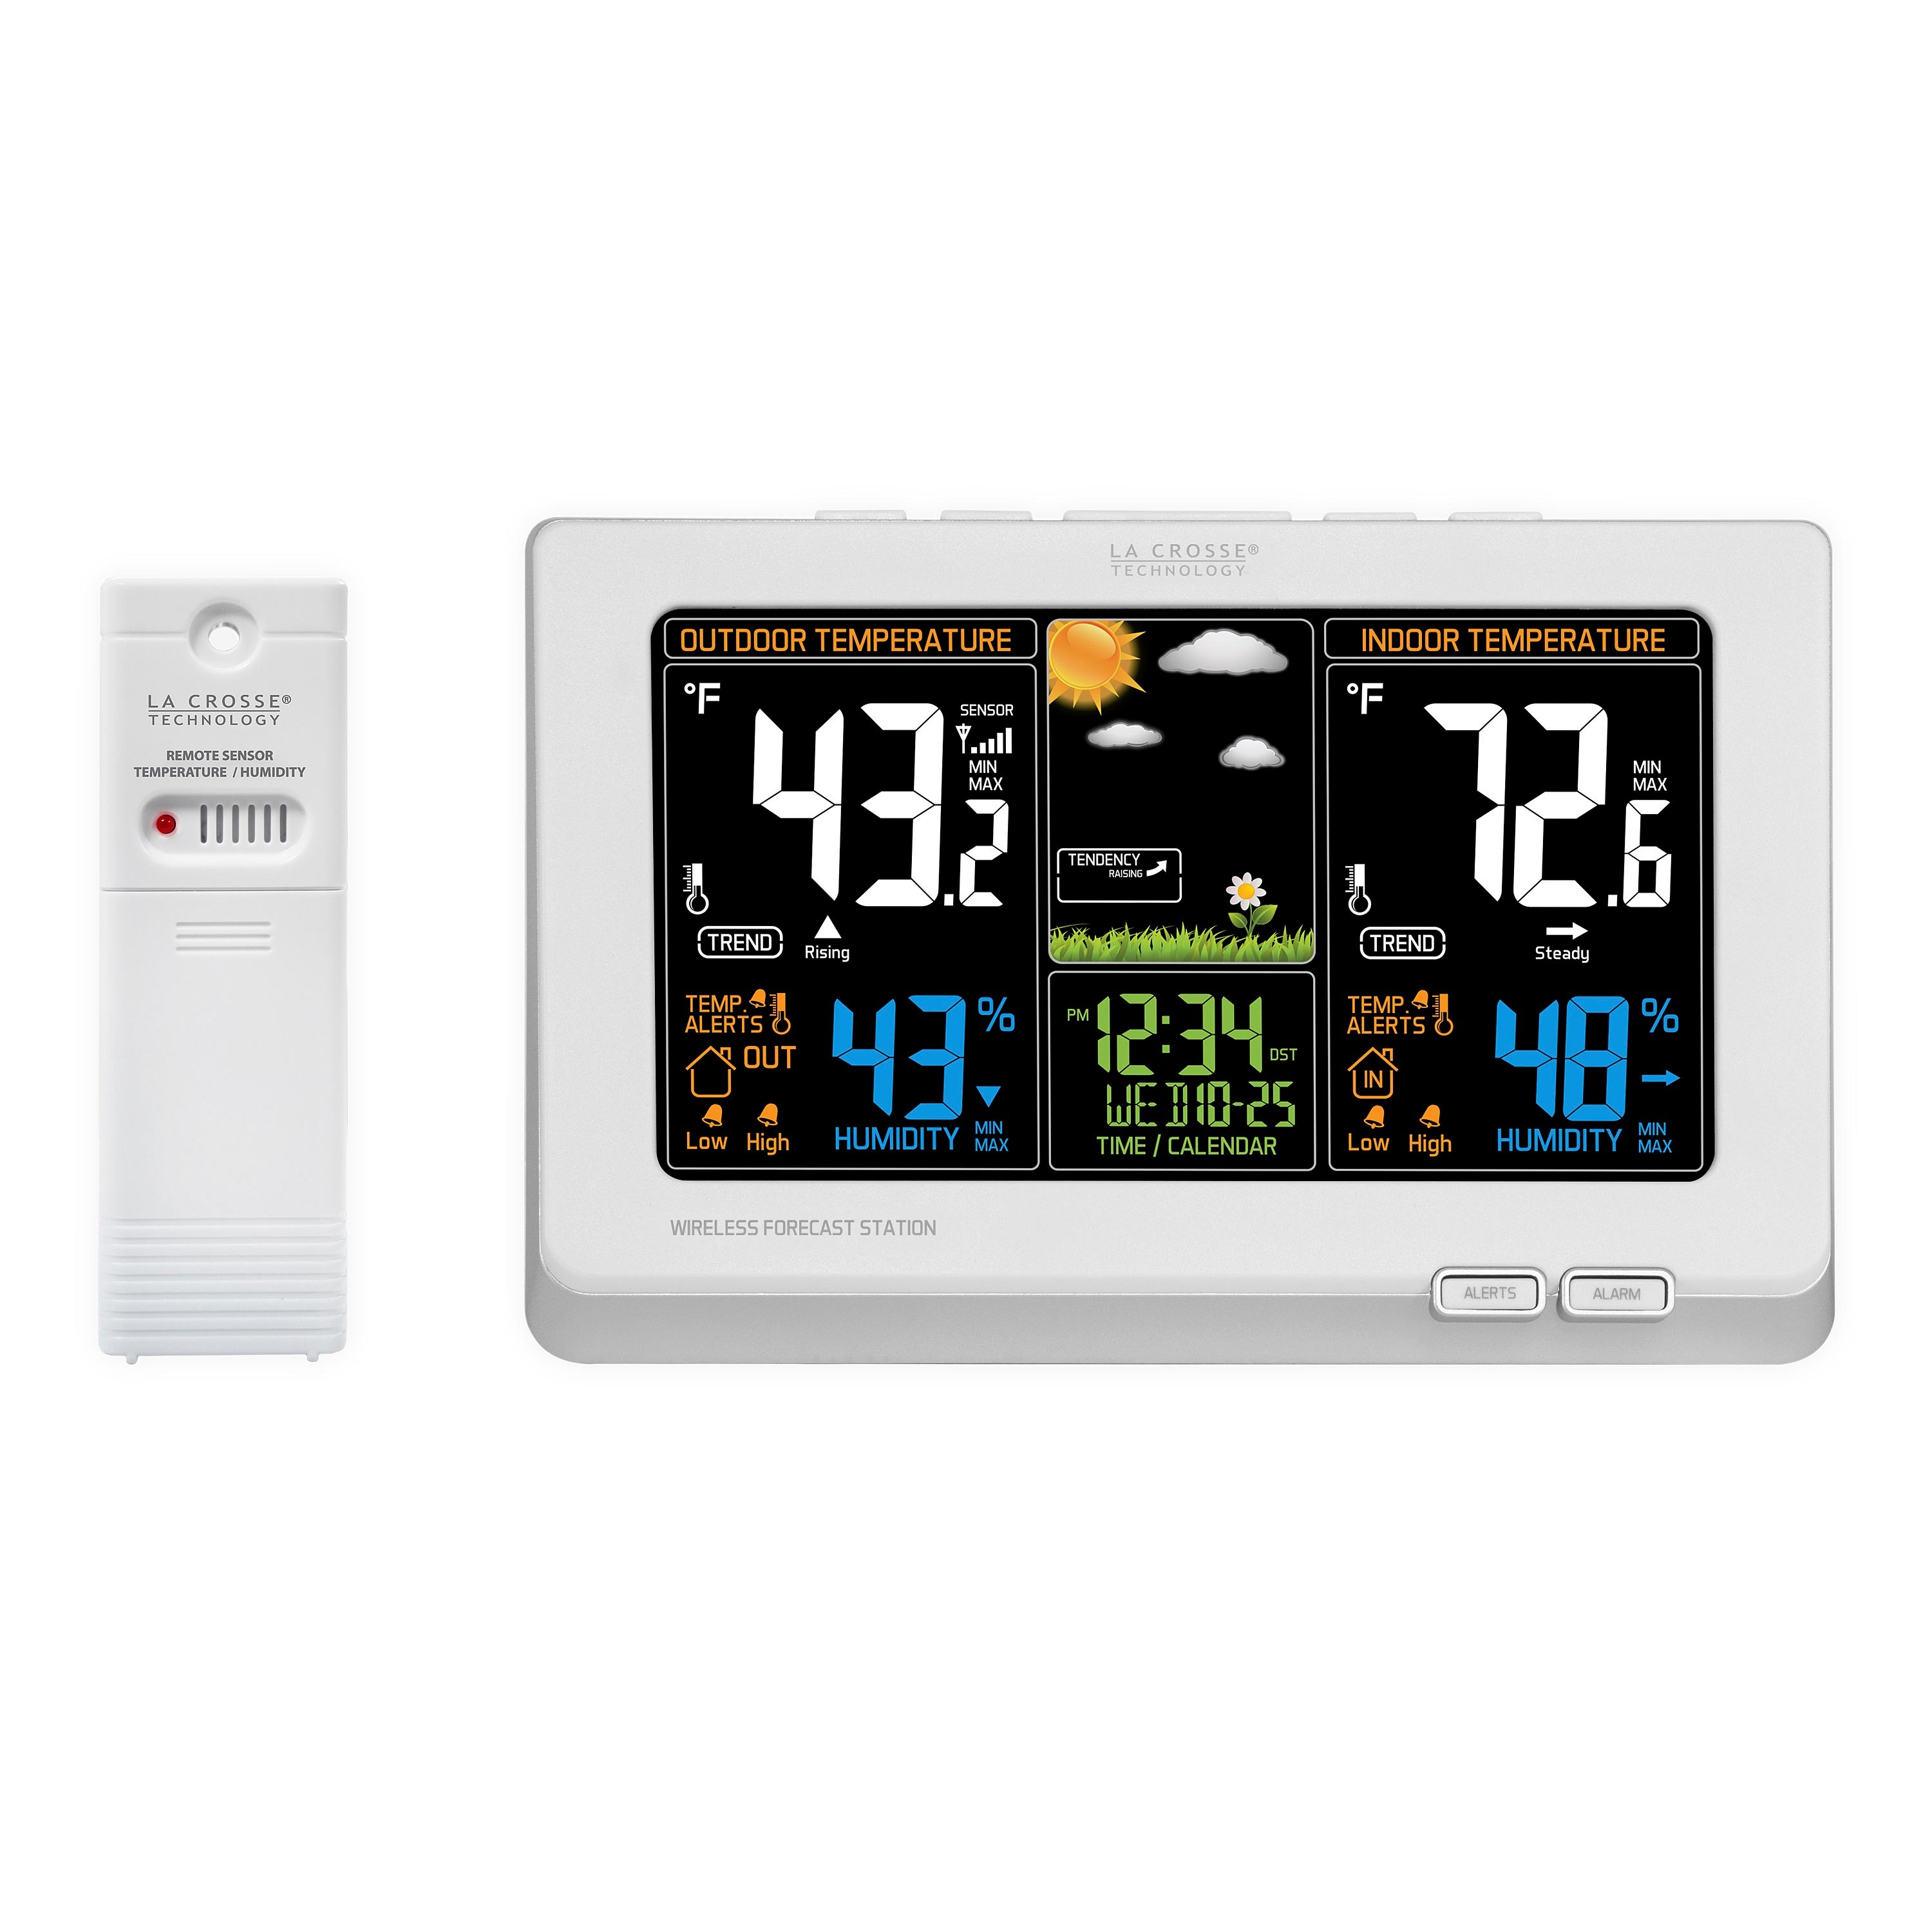 La Crosse Color-Display Weather Station with Wireless Outdoor Remote Sensore - White